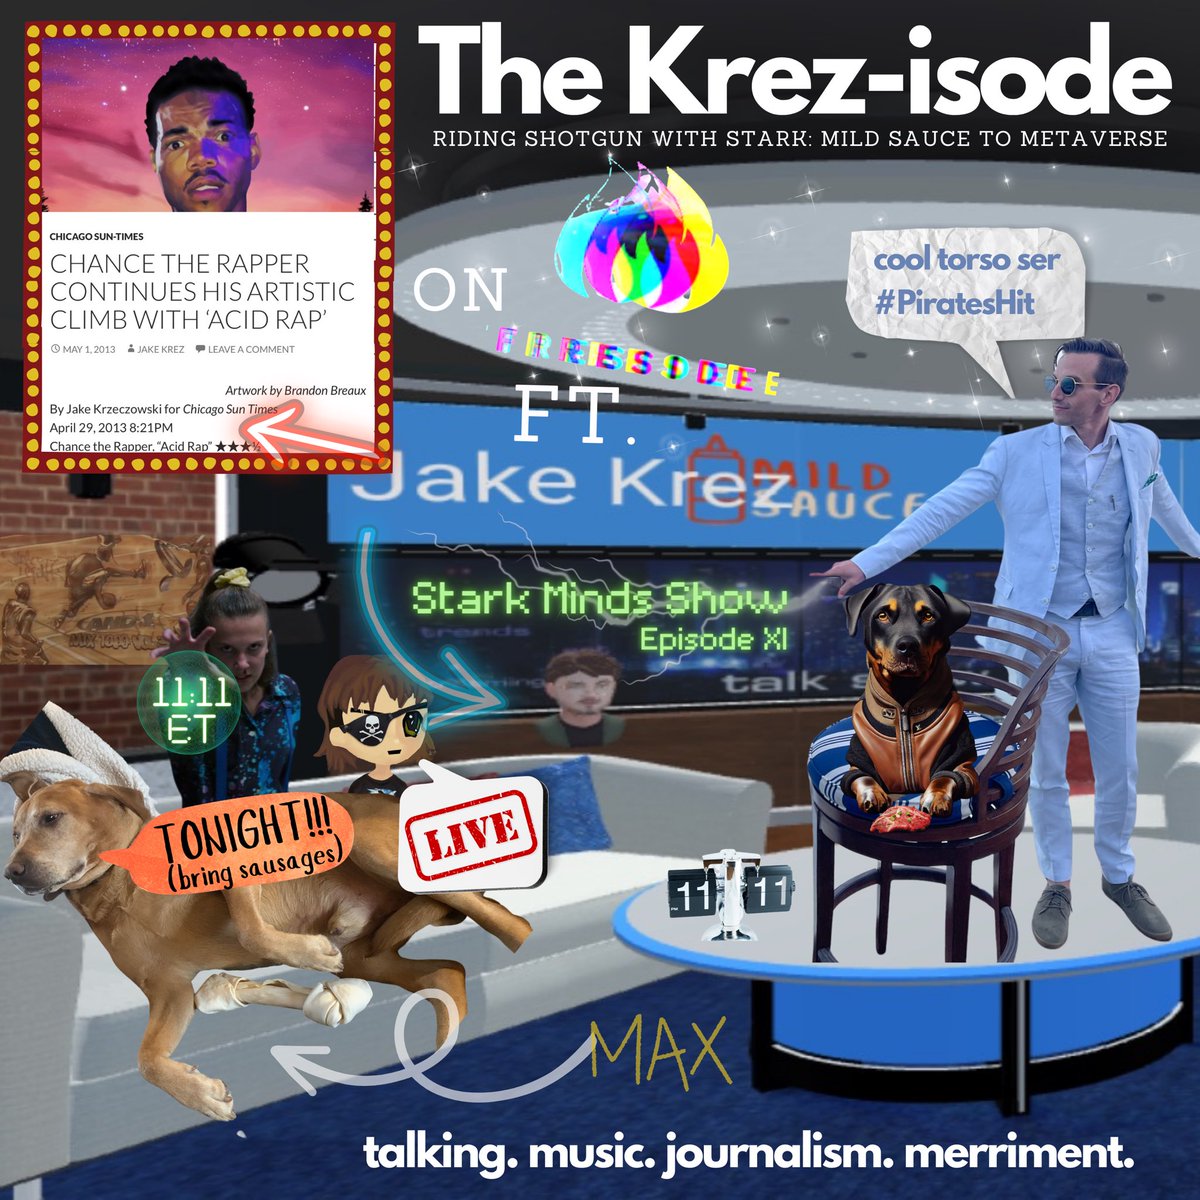 Special after hours show tonight with @JakeKrez. OG homie of @DonMichaelStark. Journalist. Music man. Hustler. Front row to rise of @chancetherapper. Stories for days. Startup adventure w/ stark. 

Loose & fun w/ frenz kinda vibe. 11th hour, 11th minute, 11th episode. #PiratesHit